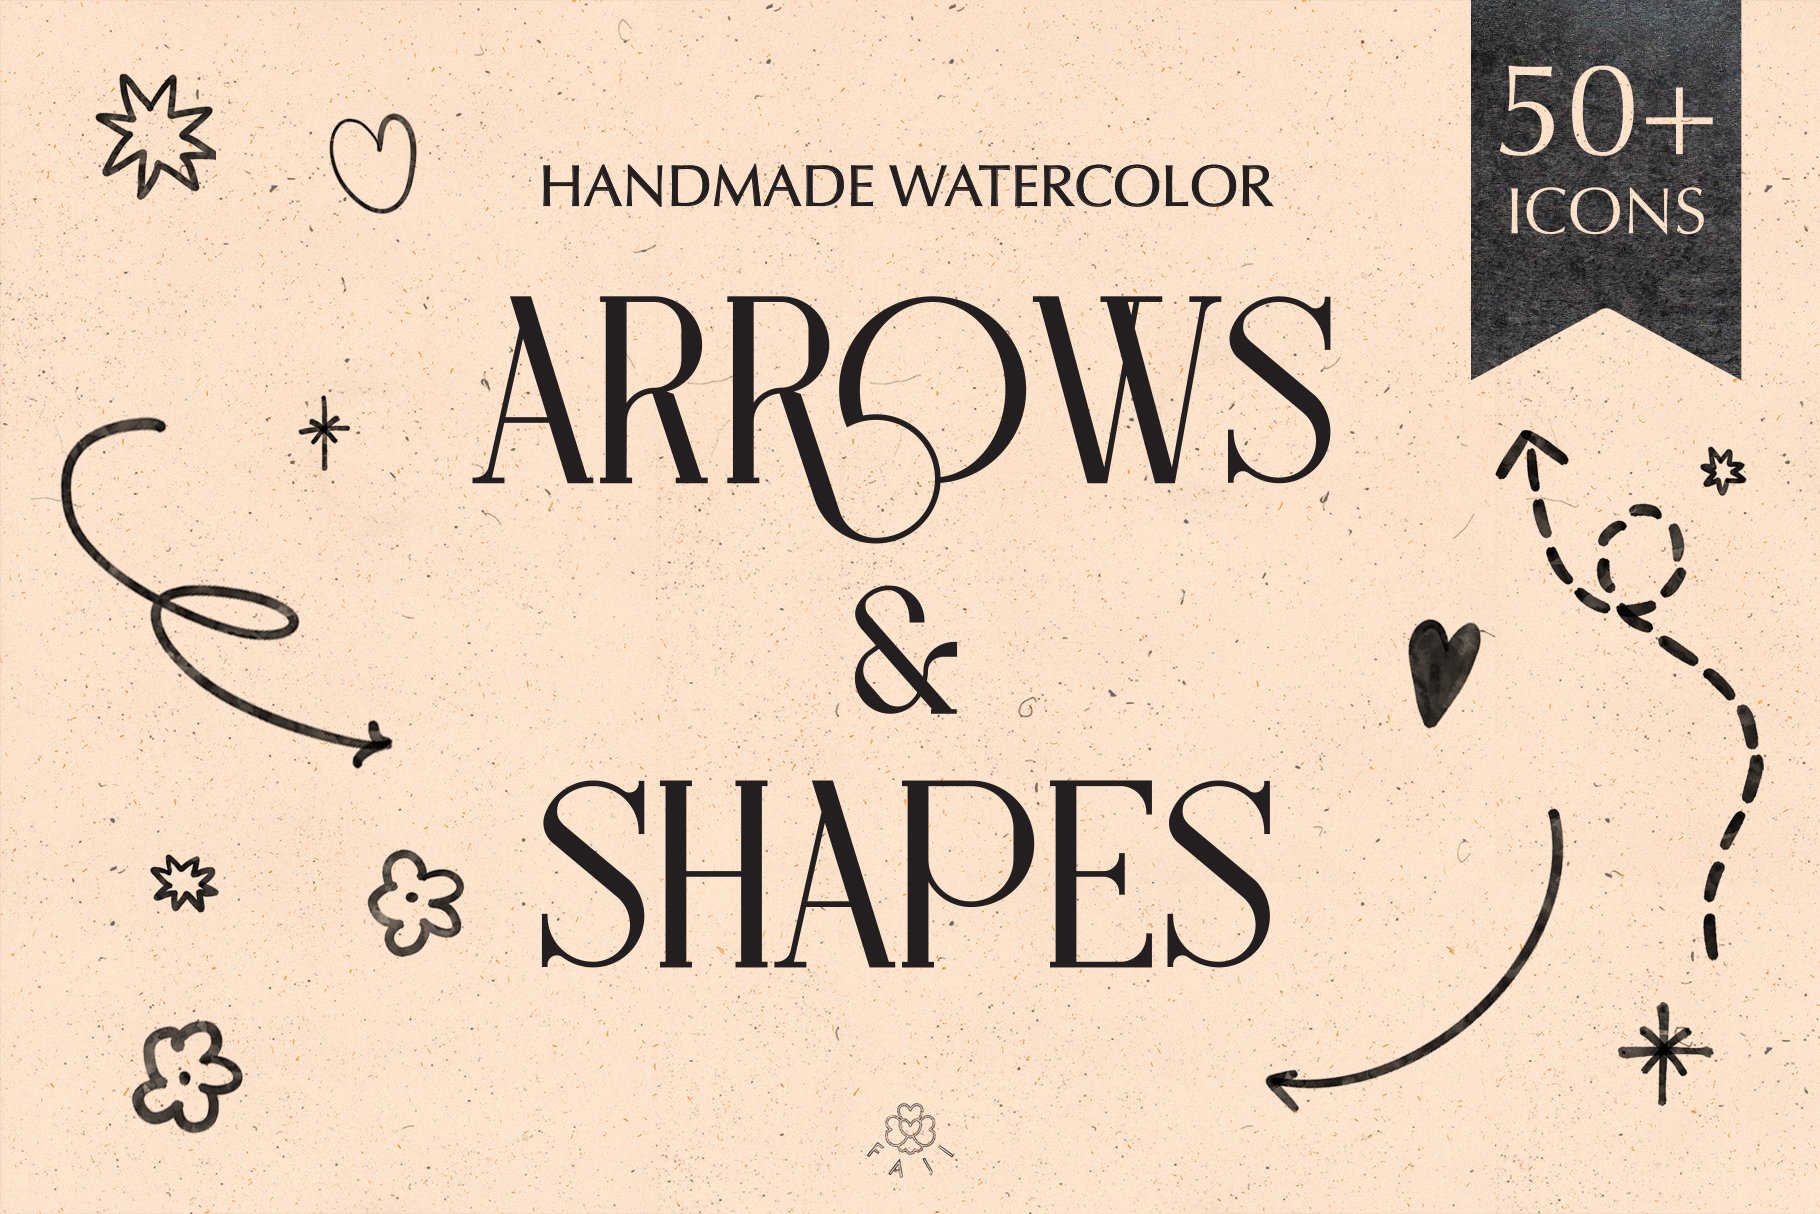 Handmade Watercolor Arrows & Shapes cover image.